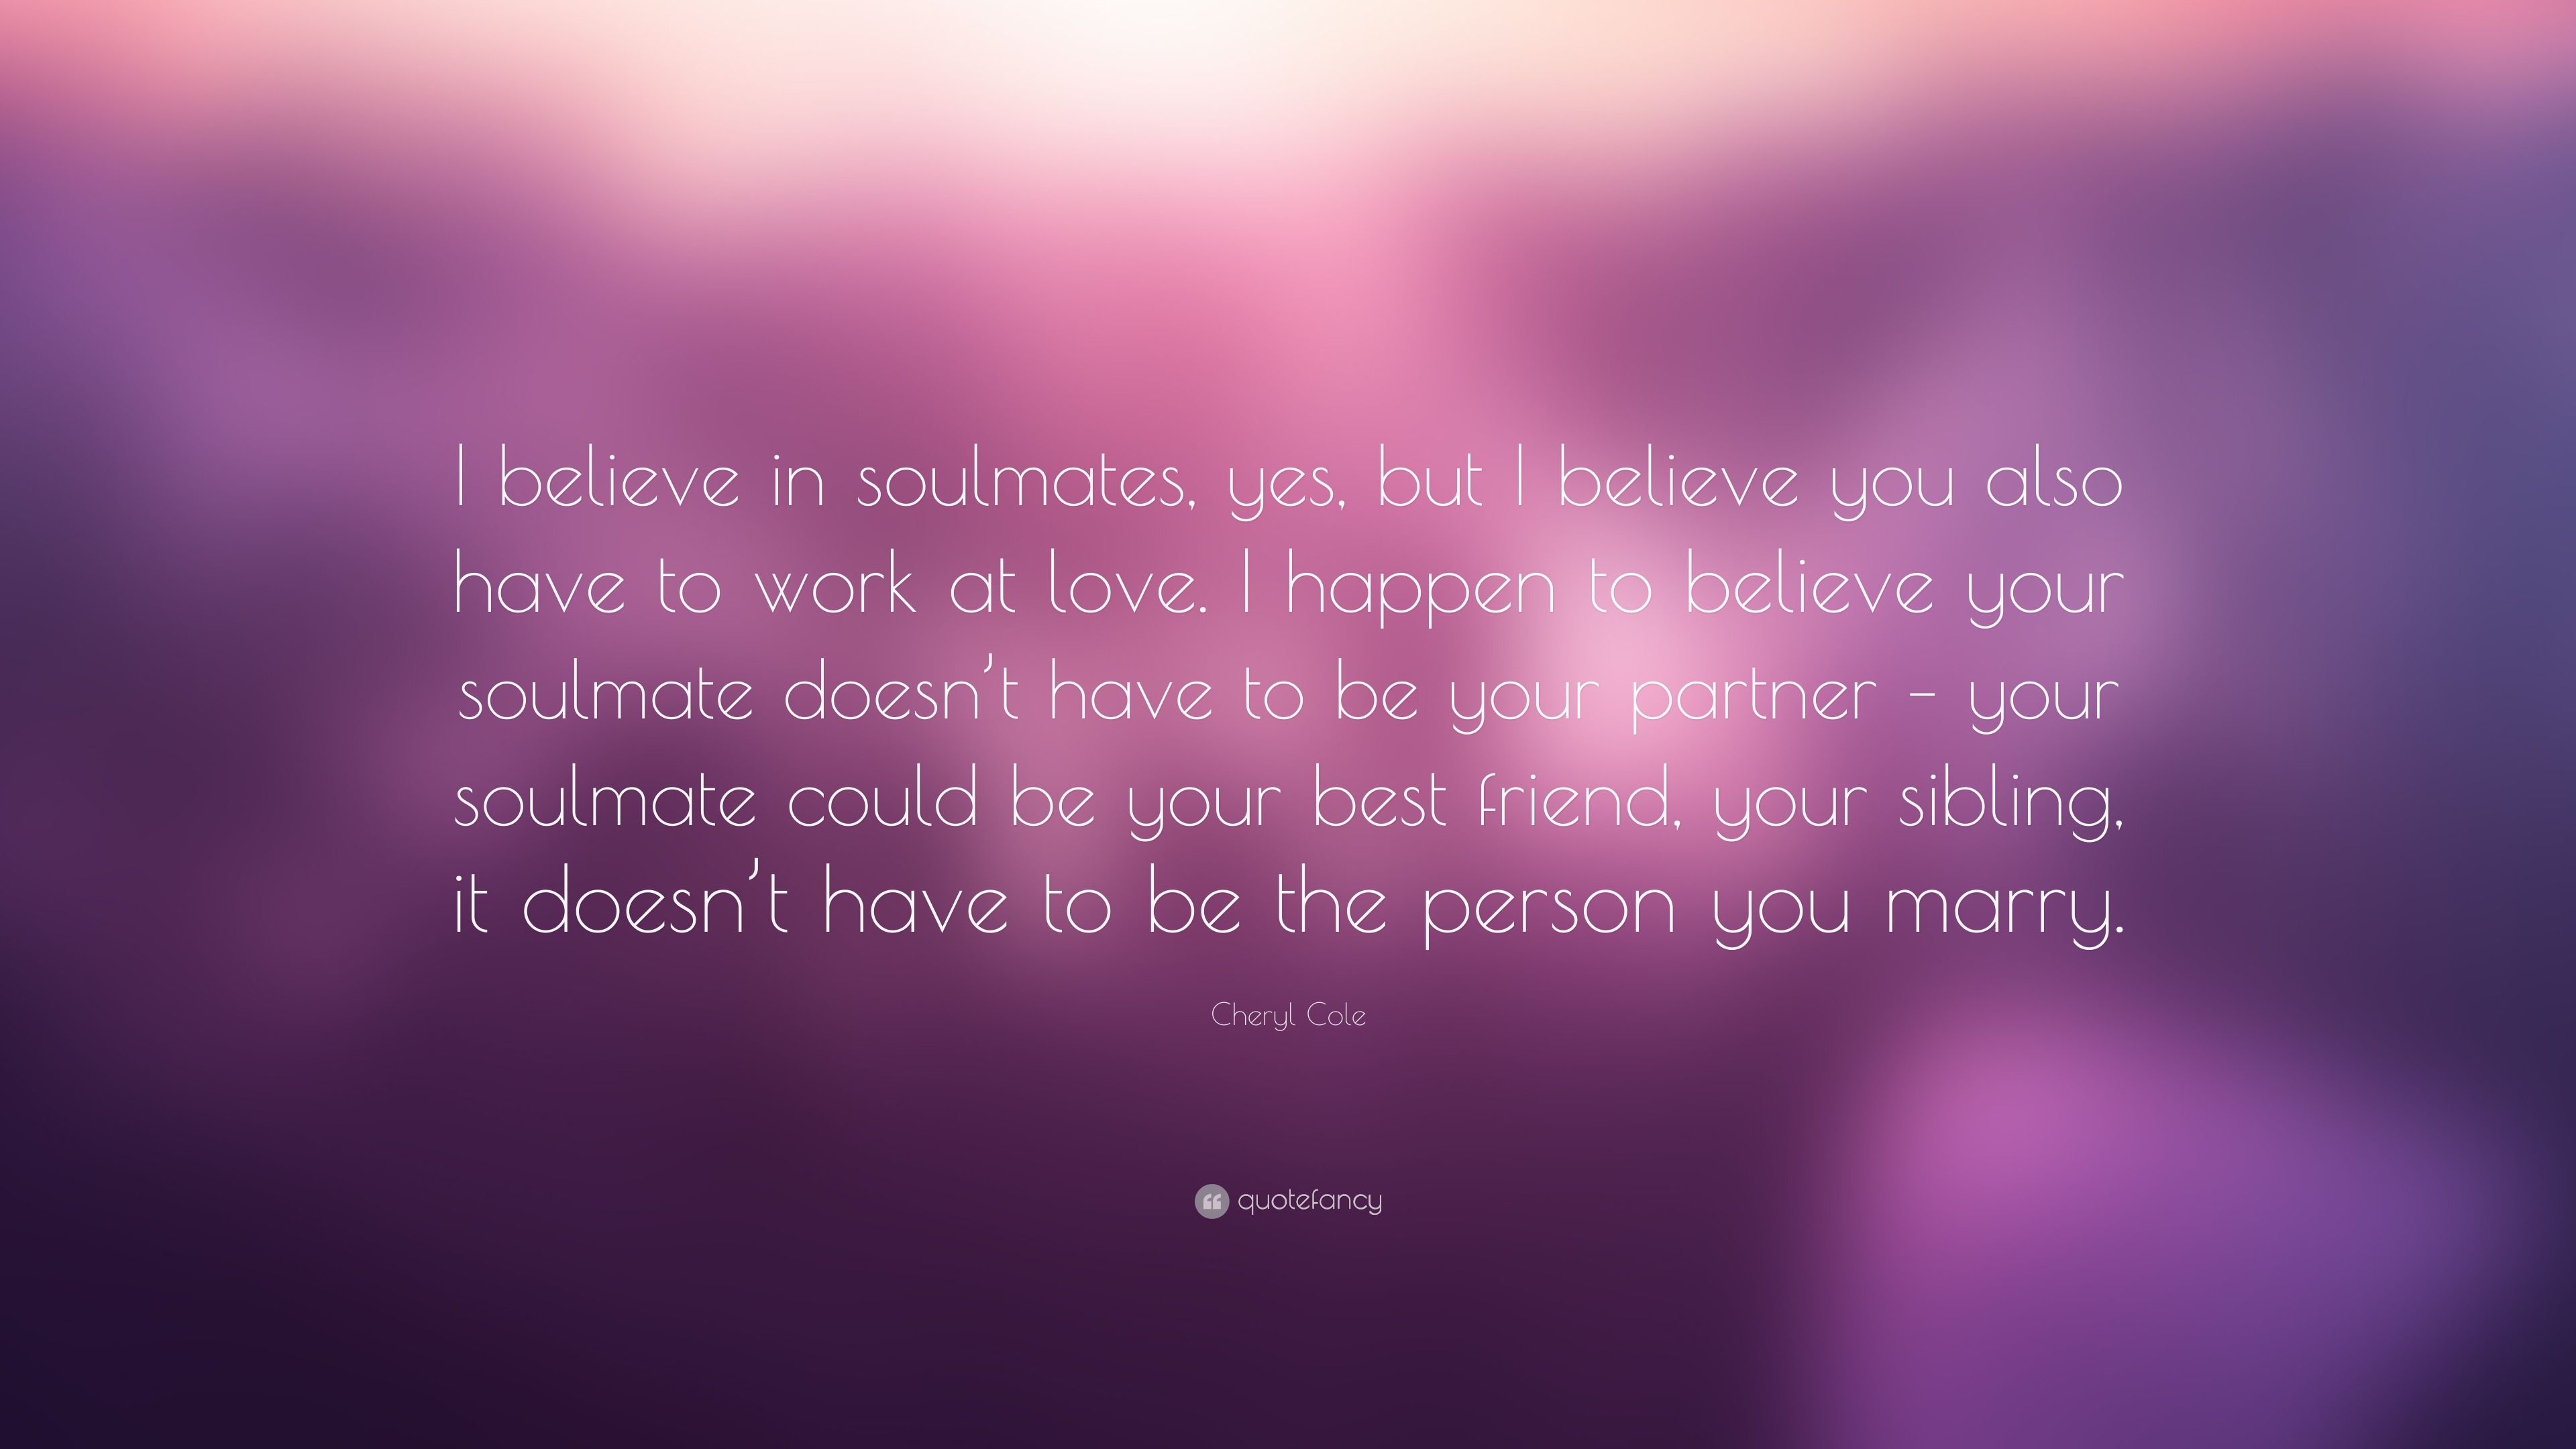 Cheryl Cole Quote: “I Believe In Soulmates, Yes, But I Believe You Also Have To Work At Love. I Happen To Believe Your Soulmate Doesn't Have...”